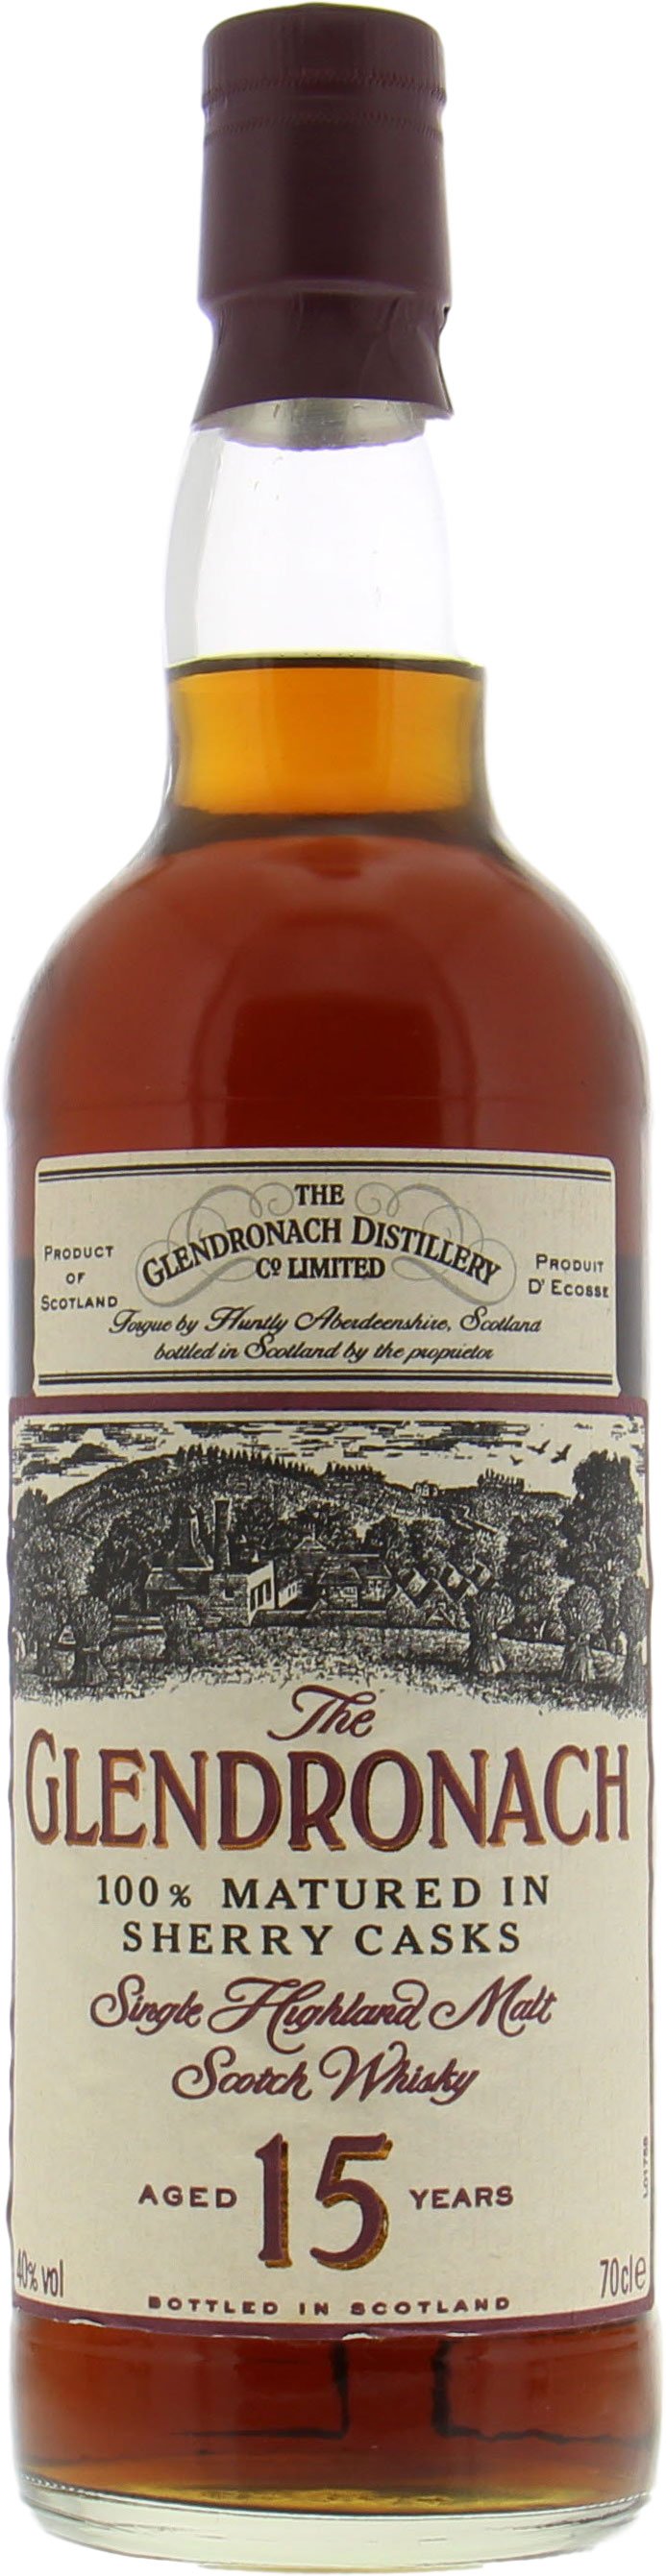 Glendronach - 15 Years Old 100% Matured in Sherry Casks 40% NV No Original Box Included